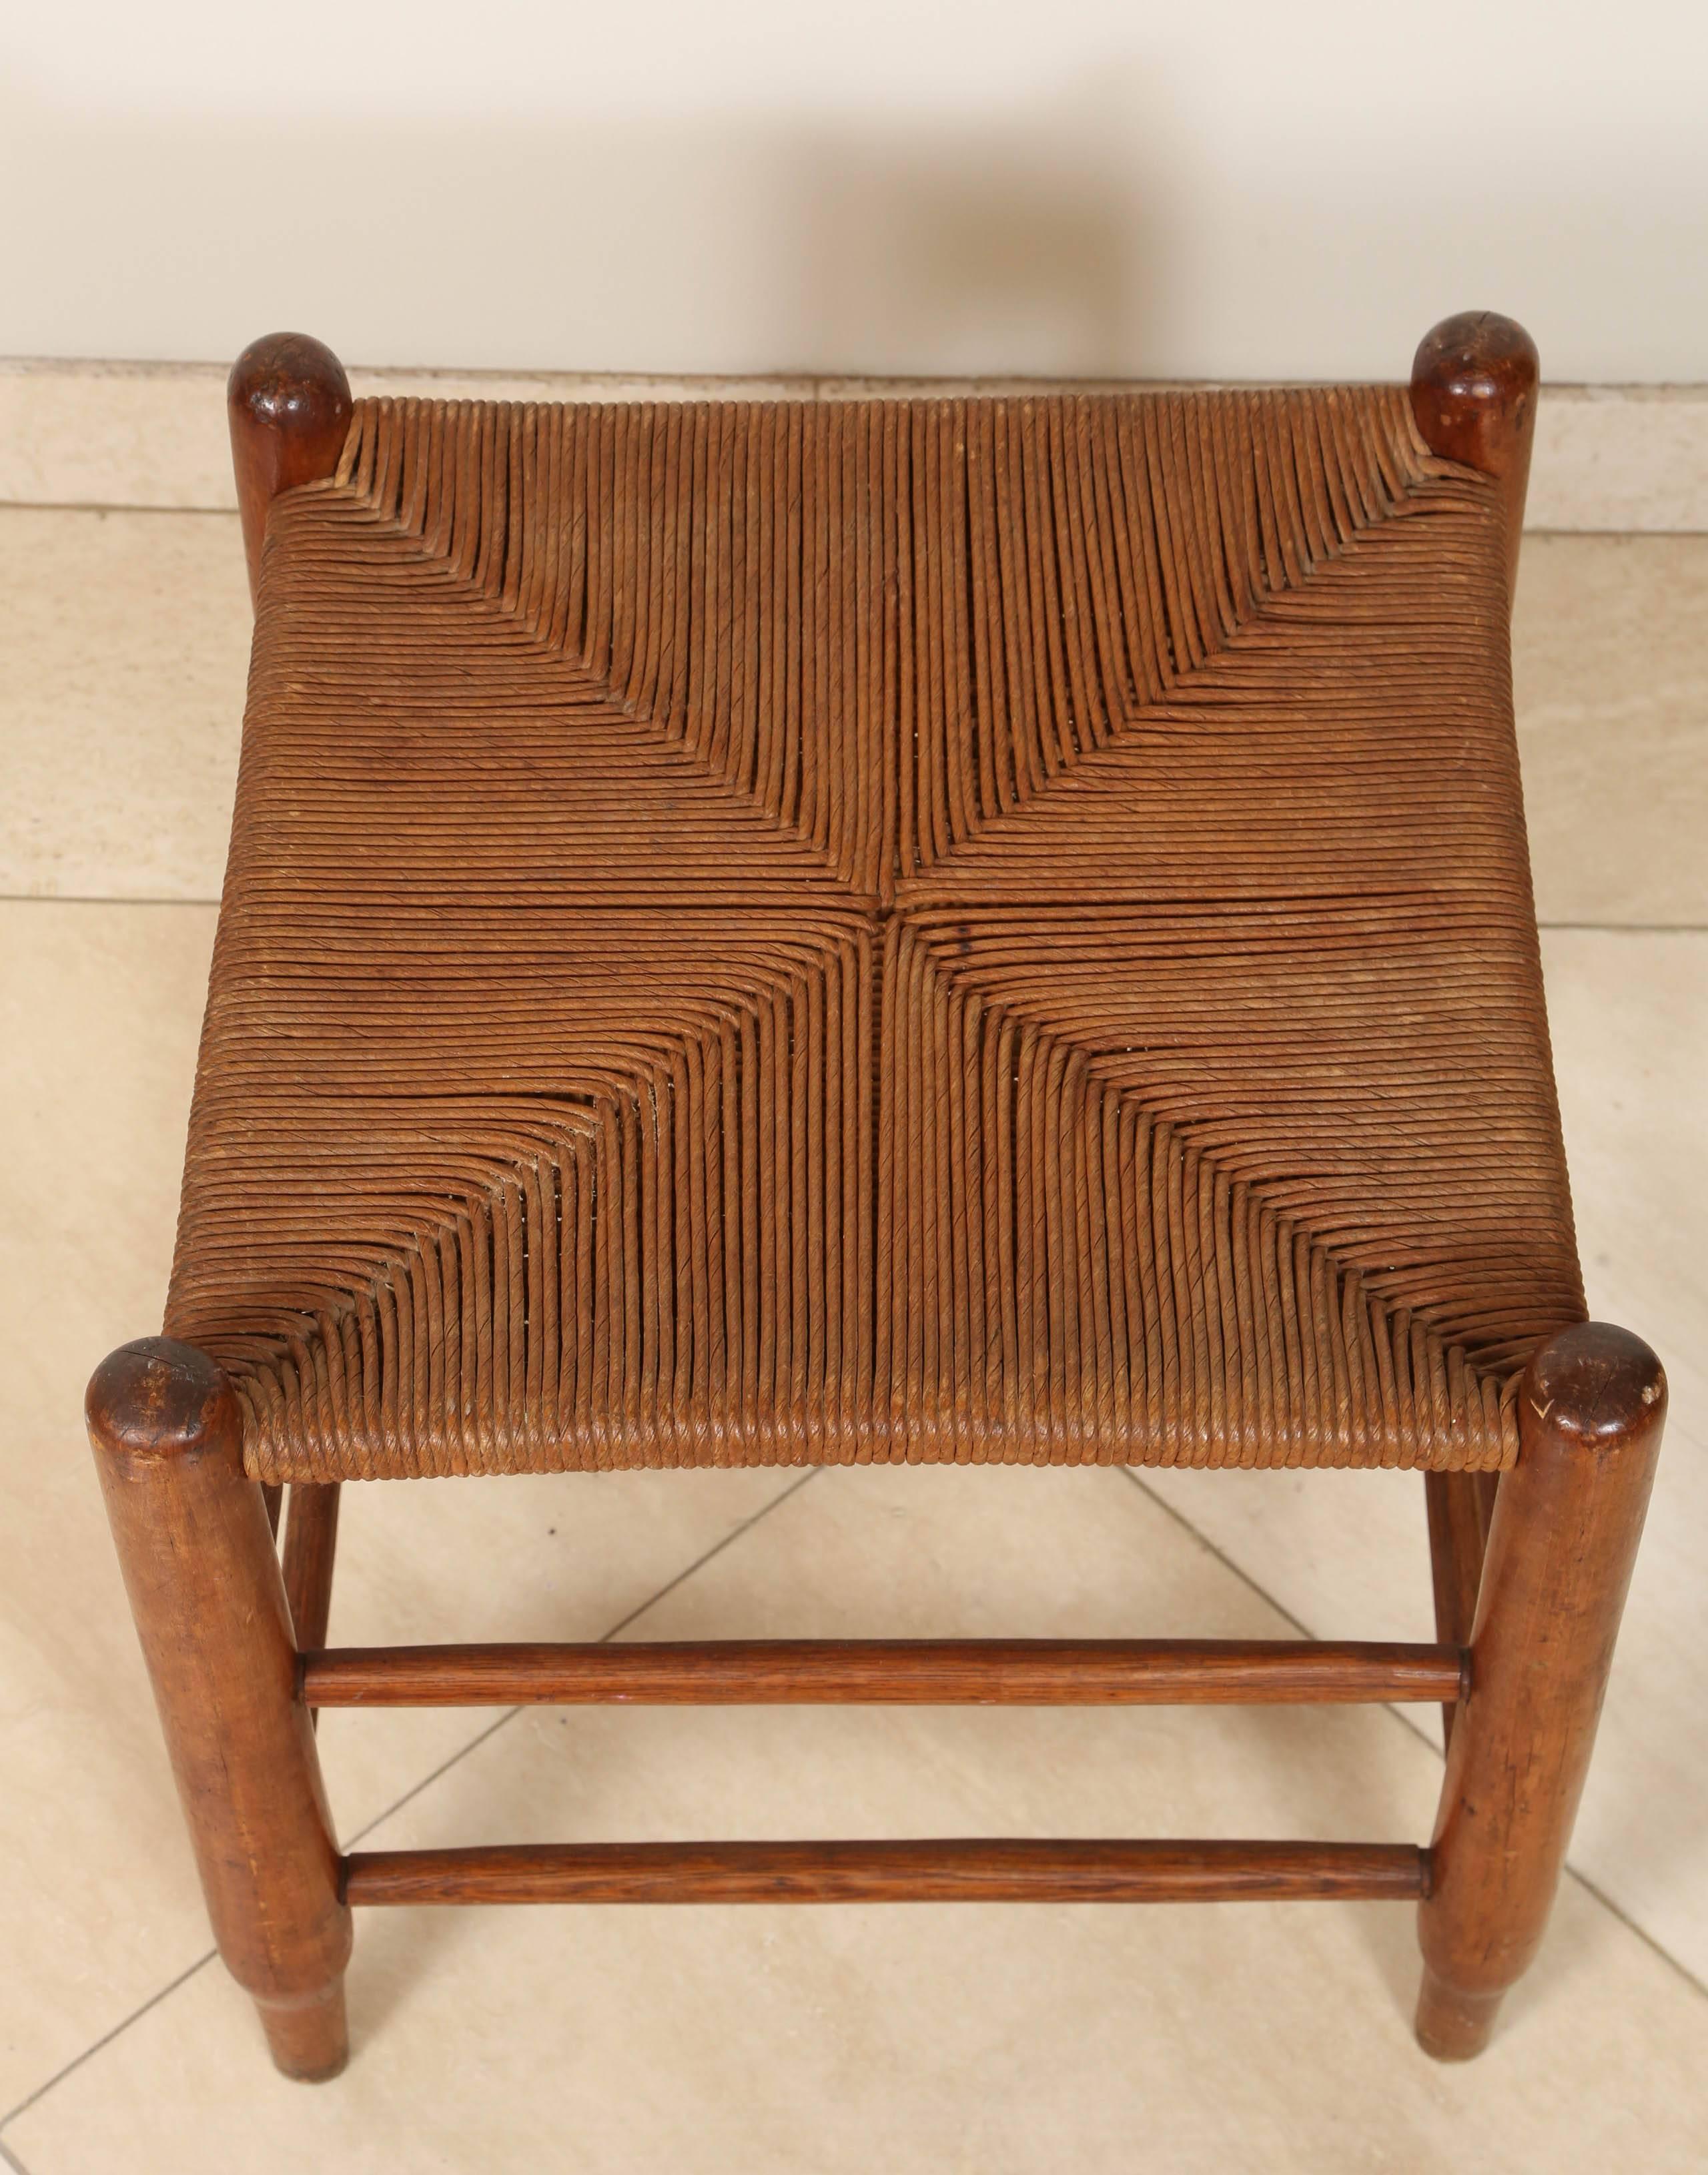 Wooden French Provincial Country Oak Stool with Woven Reed seating 1